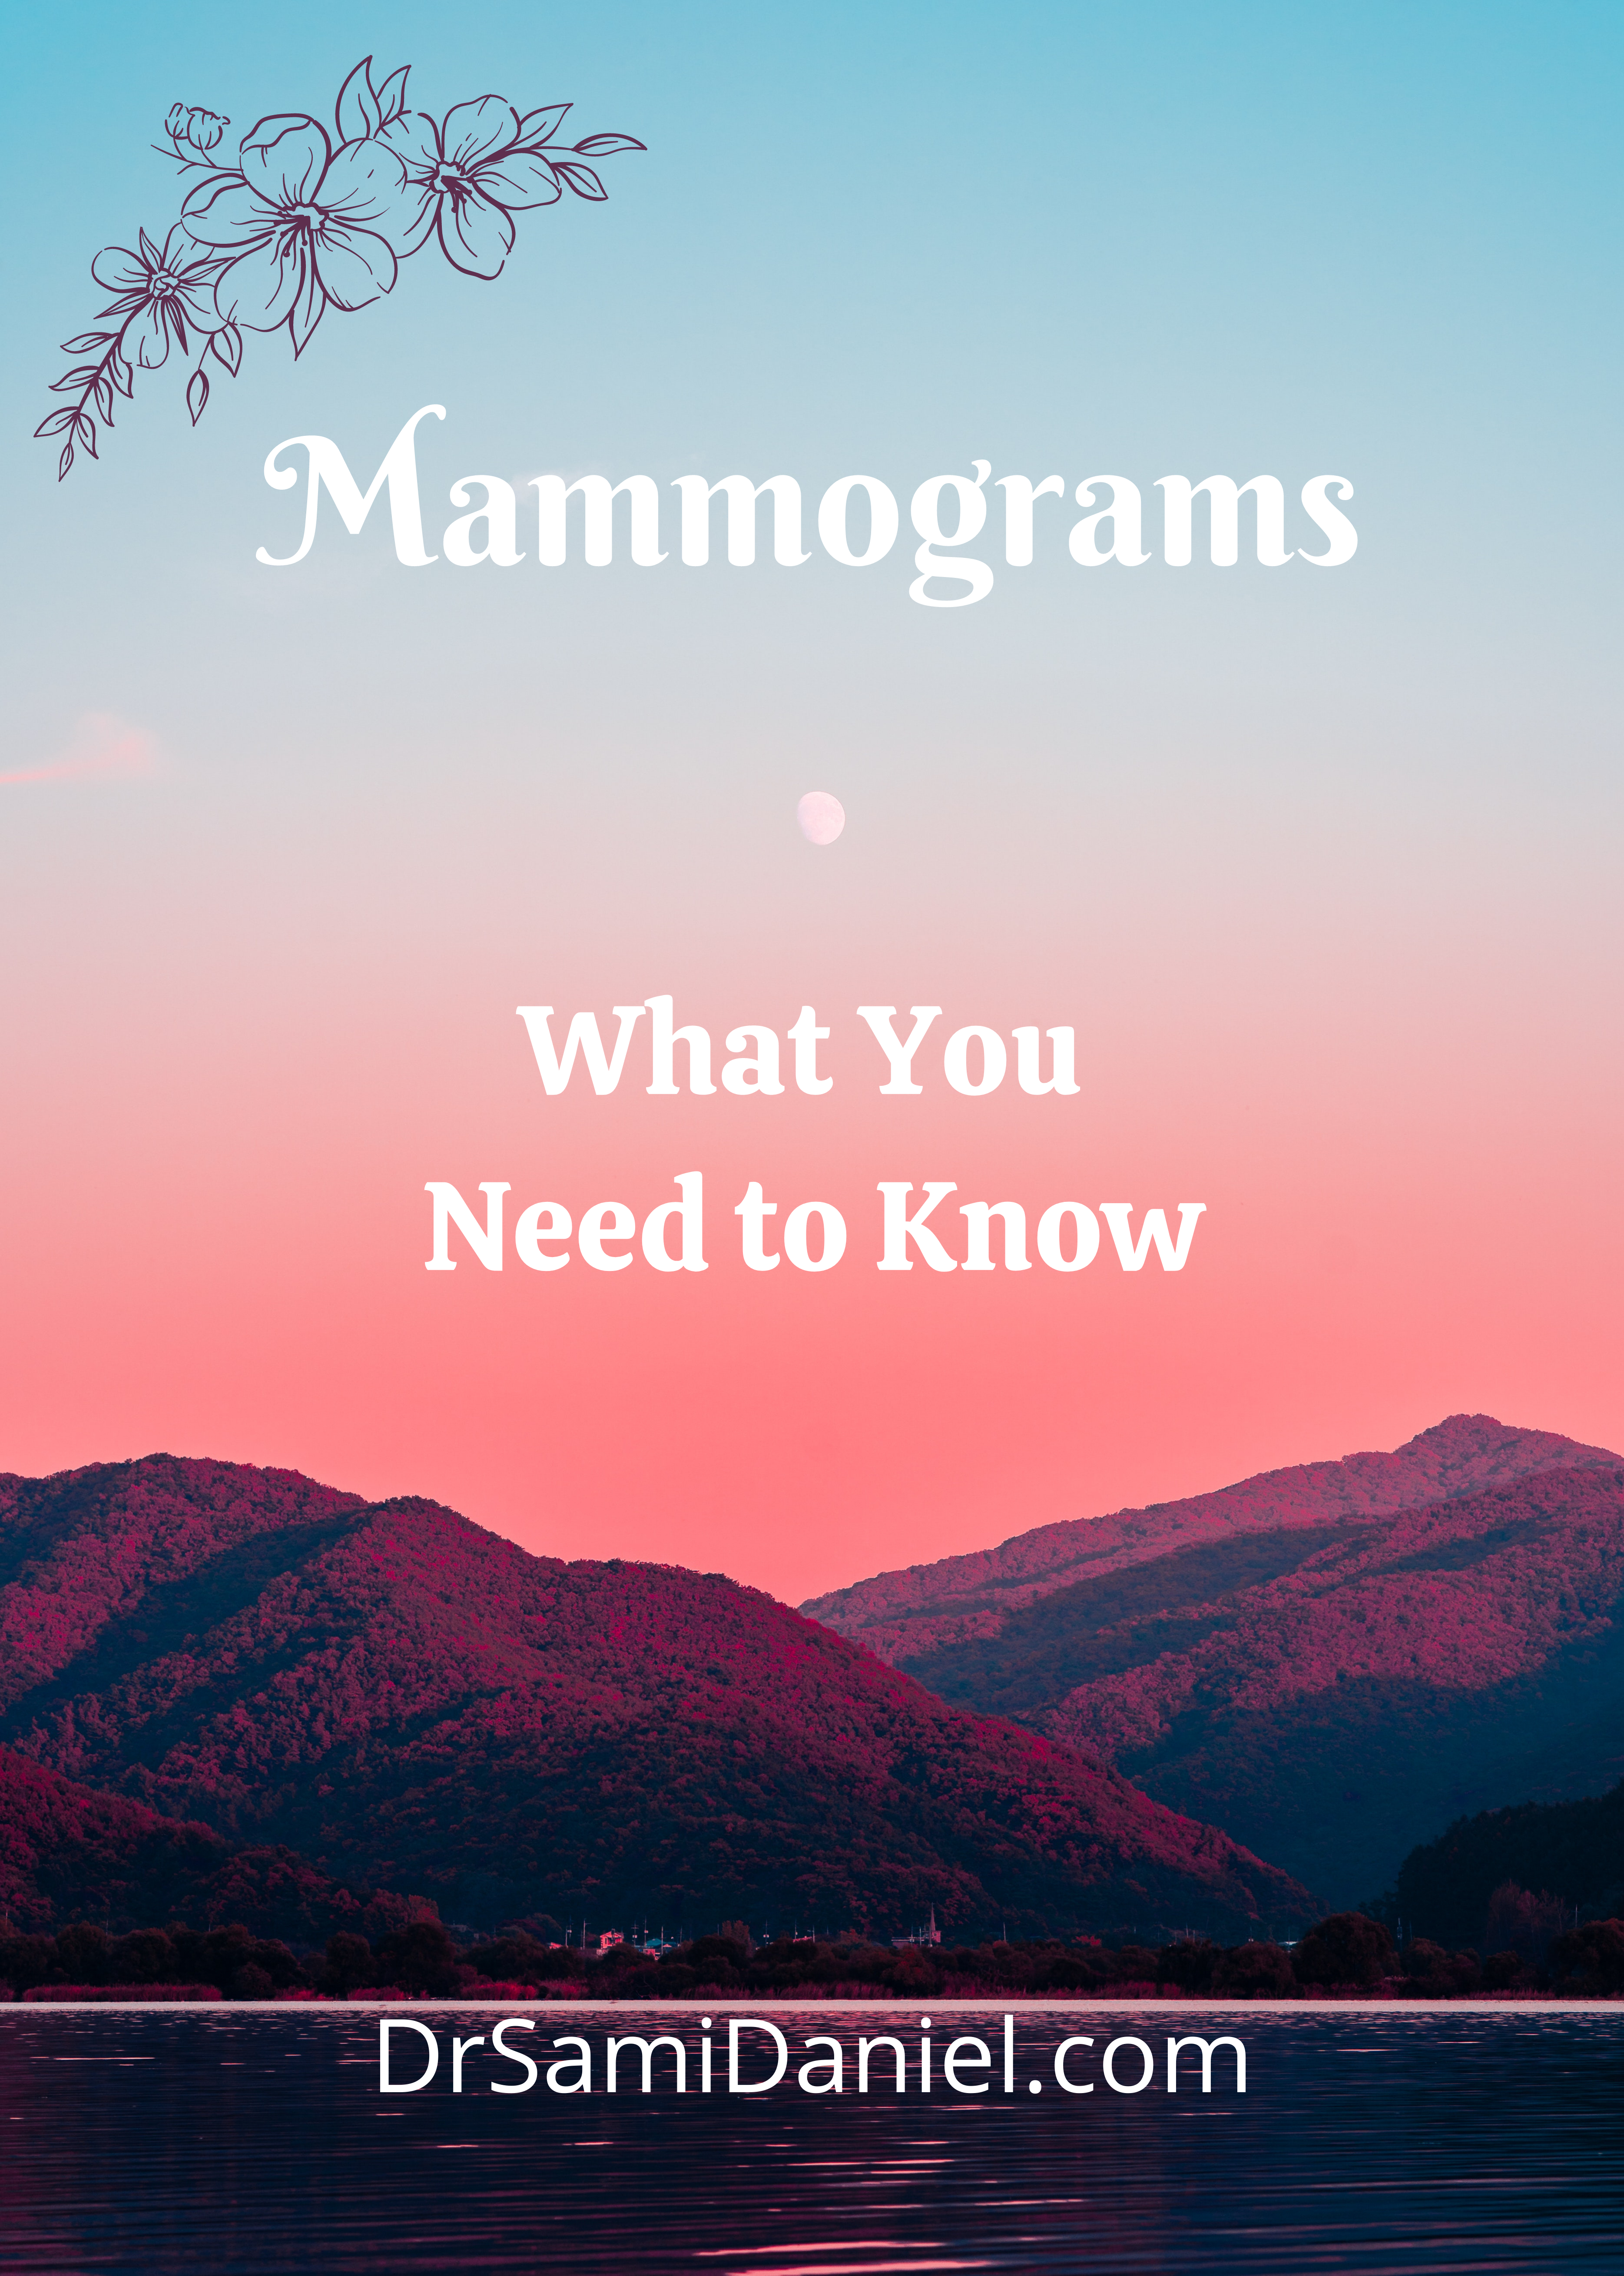 Mammogram. Doctor recommended. What you need to know.